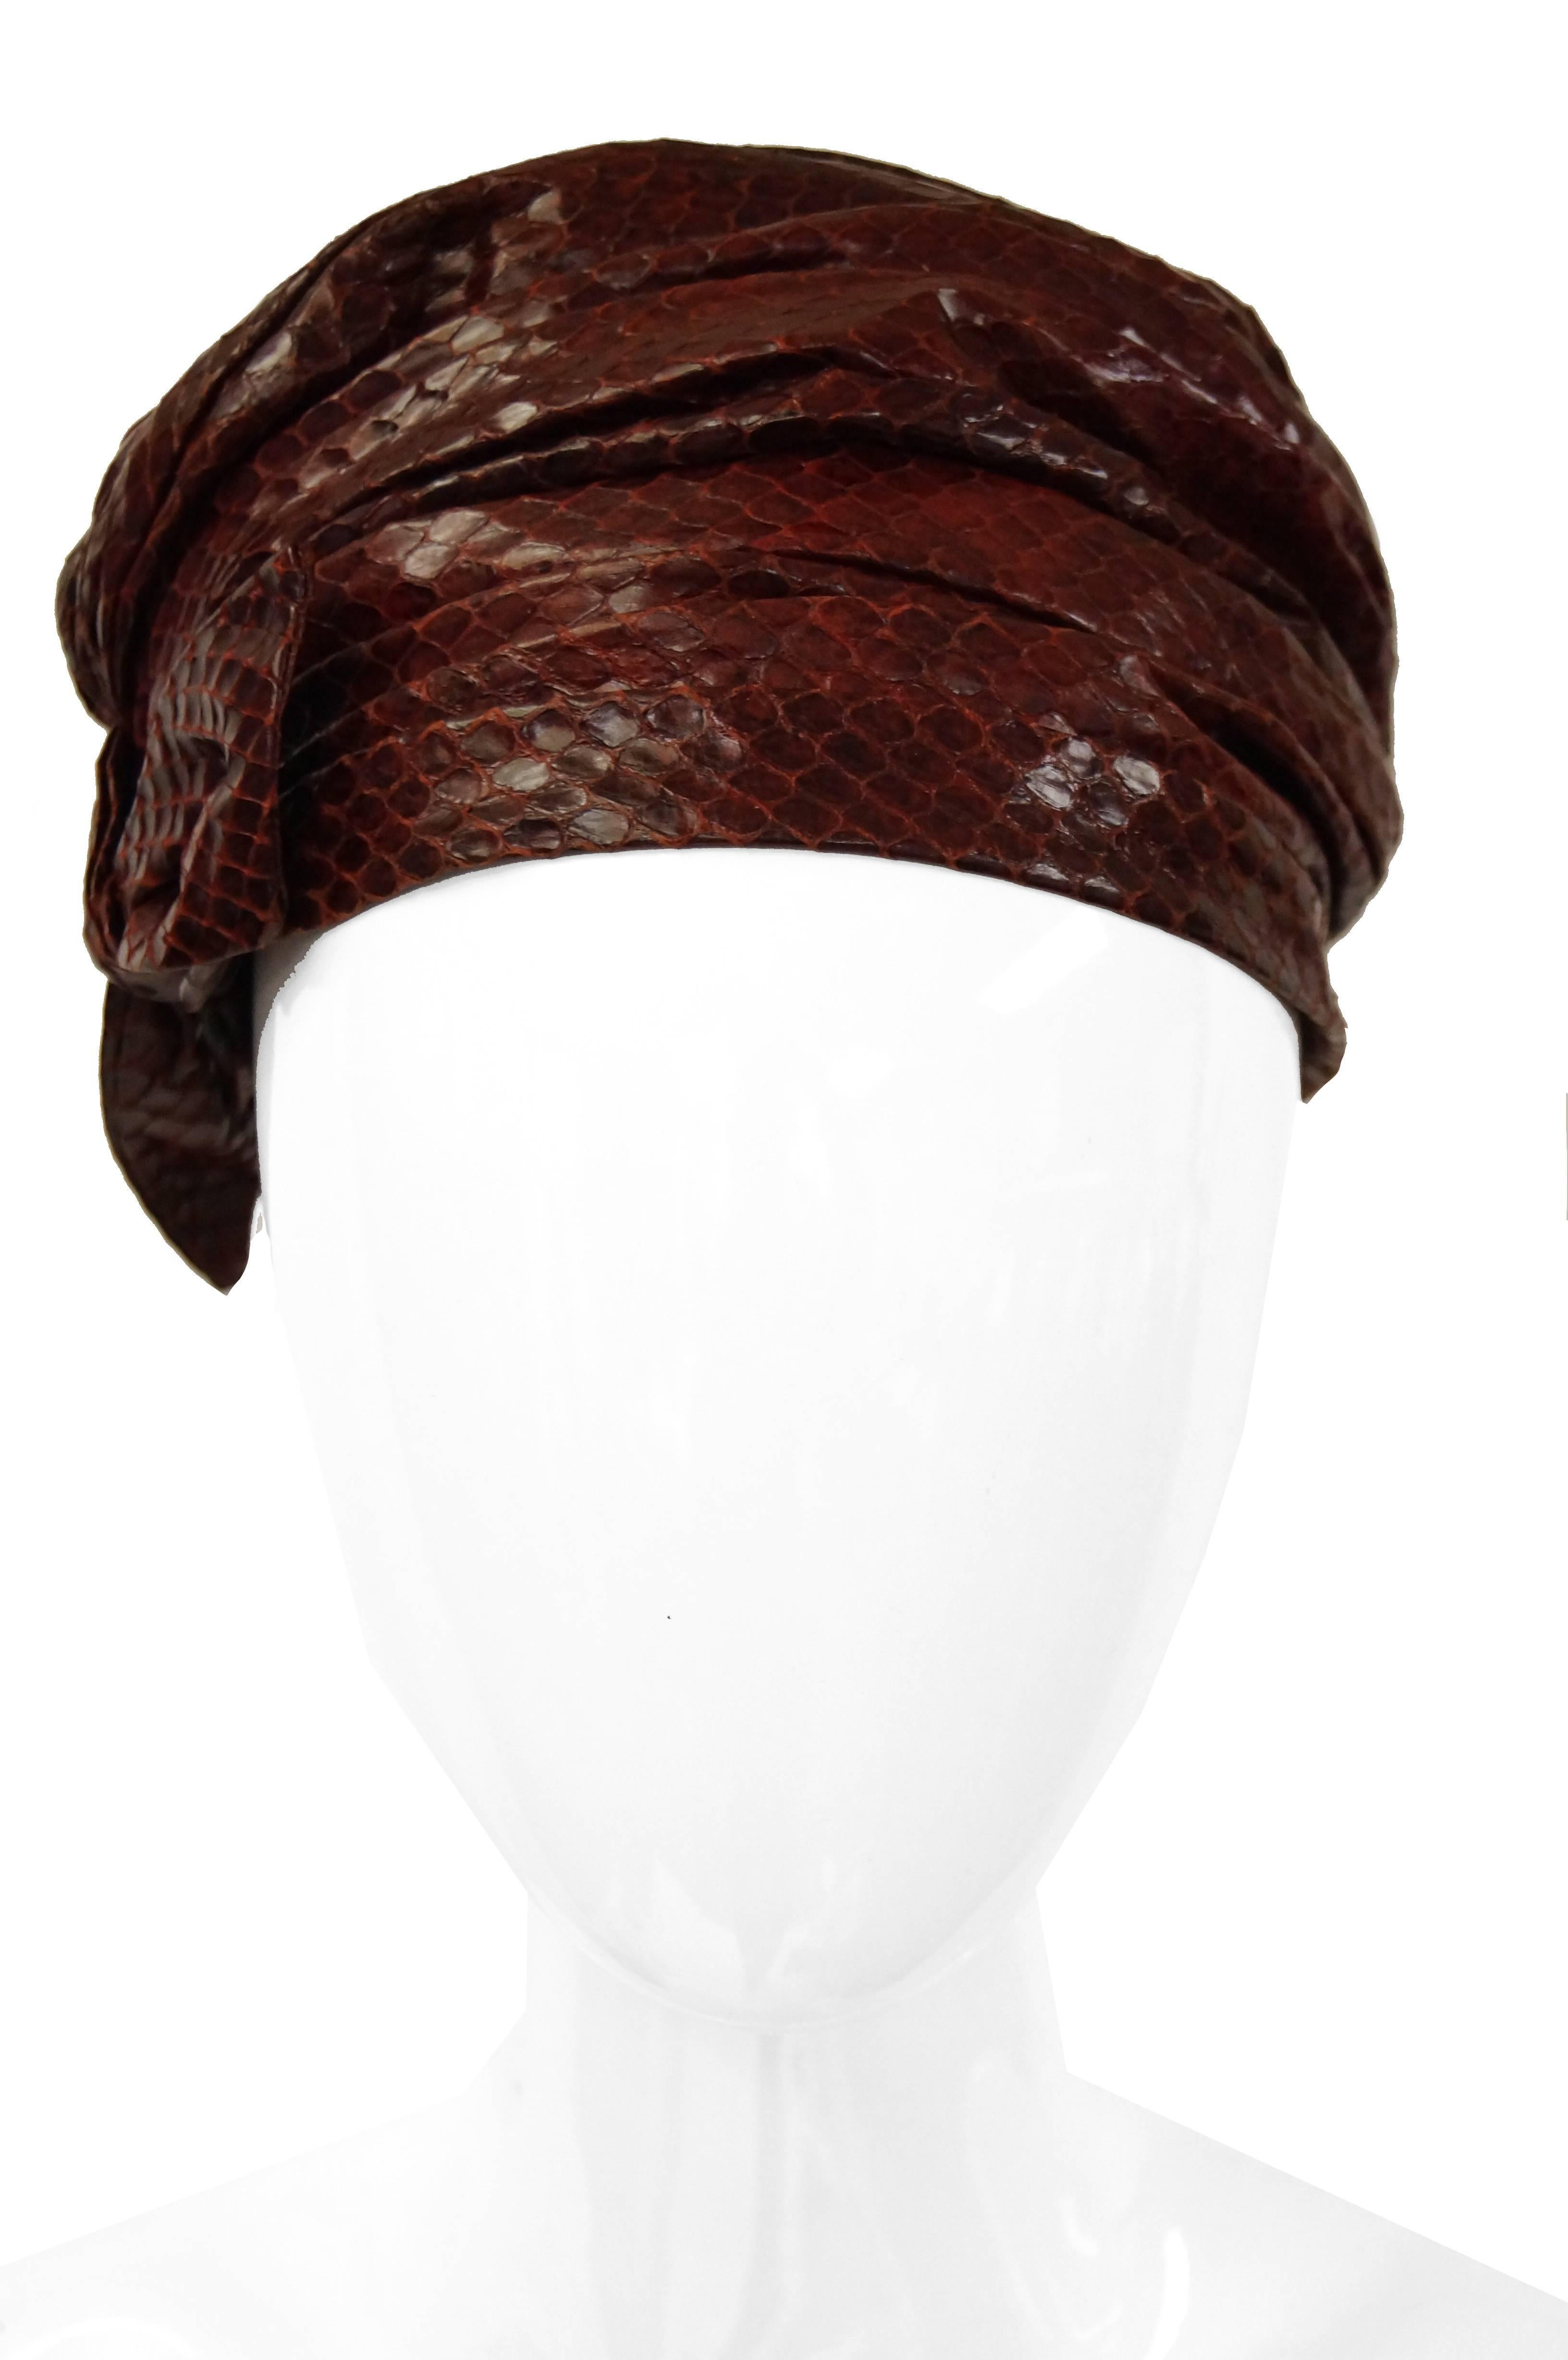  Neiman Marcus Custom Sienna Snakeskin Turban, 1950s  In Excellent Condition For Sale In Houston, TX